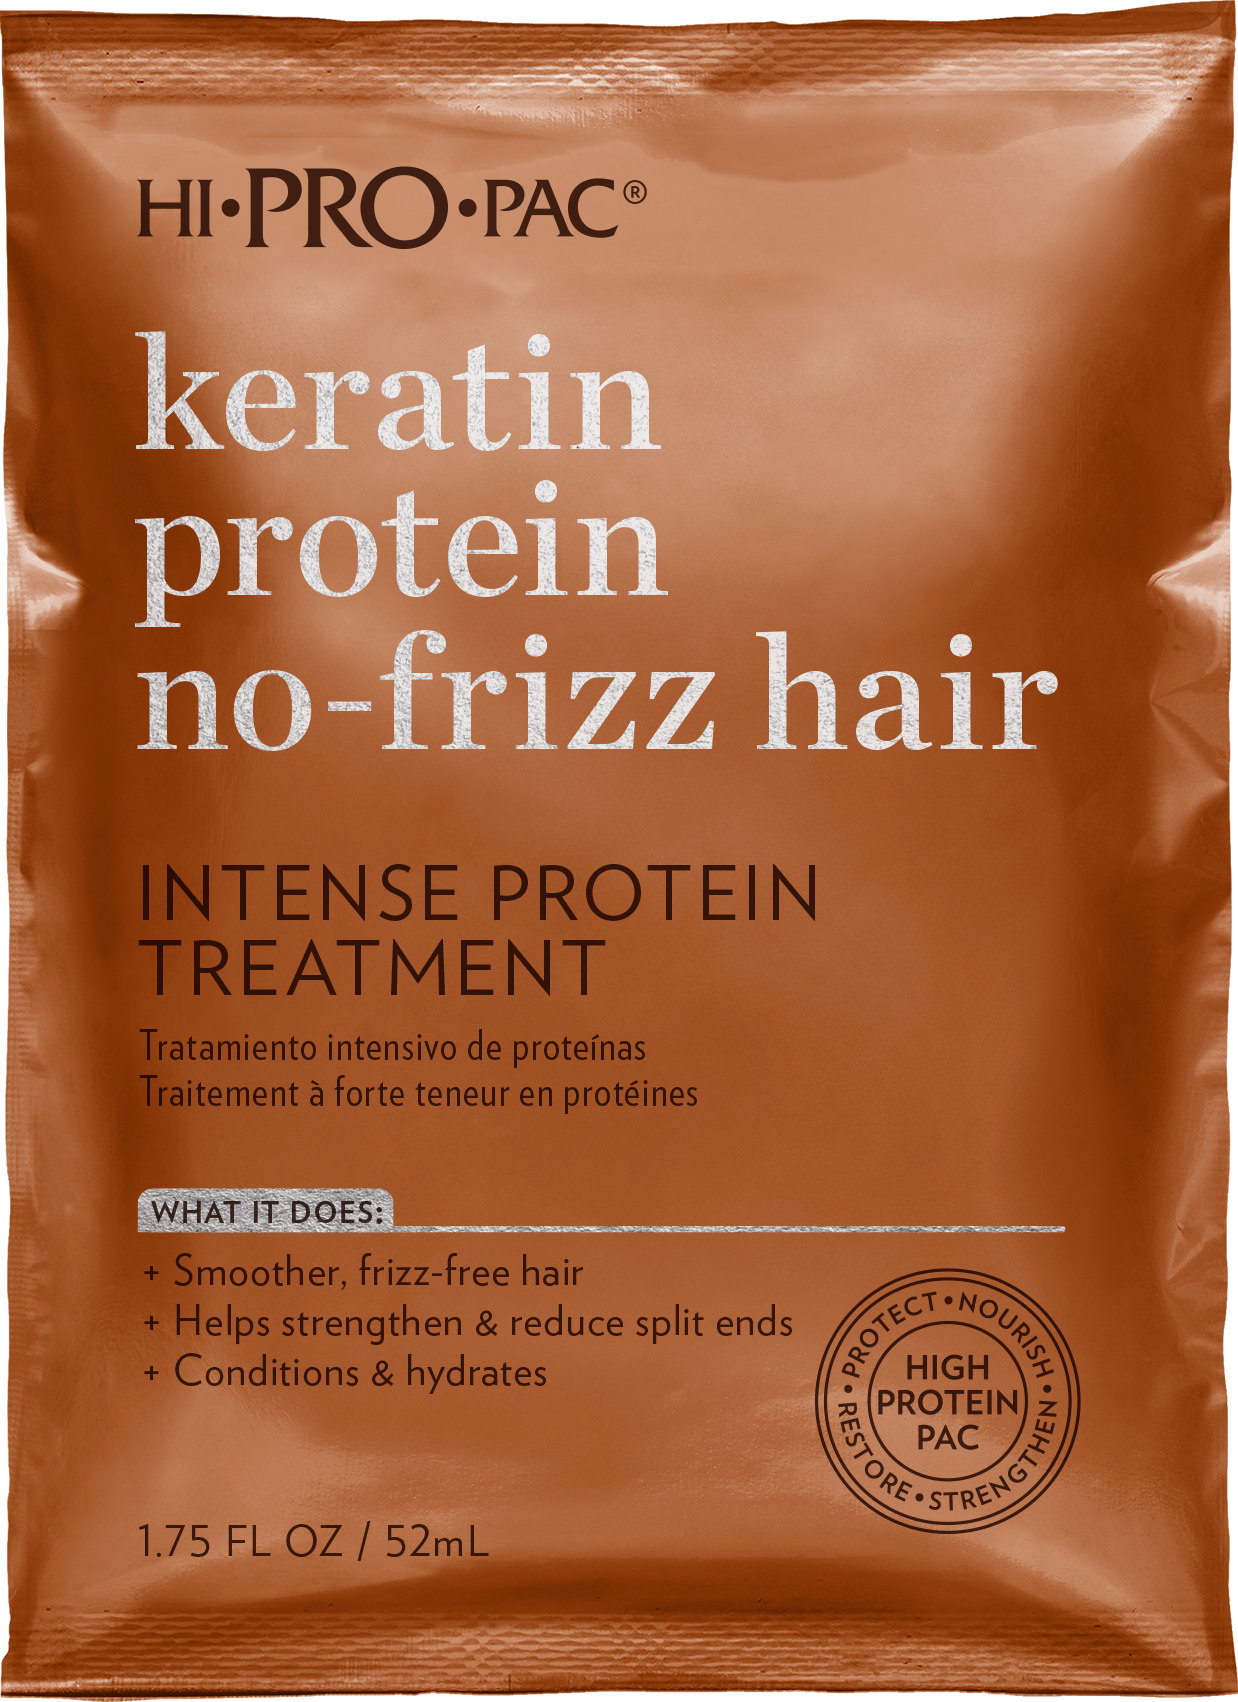 Hi Pro Pac Keratin Masque 52 mL - Hair products New Zealand | Nation wide  hairdressing & hair care group